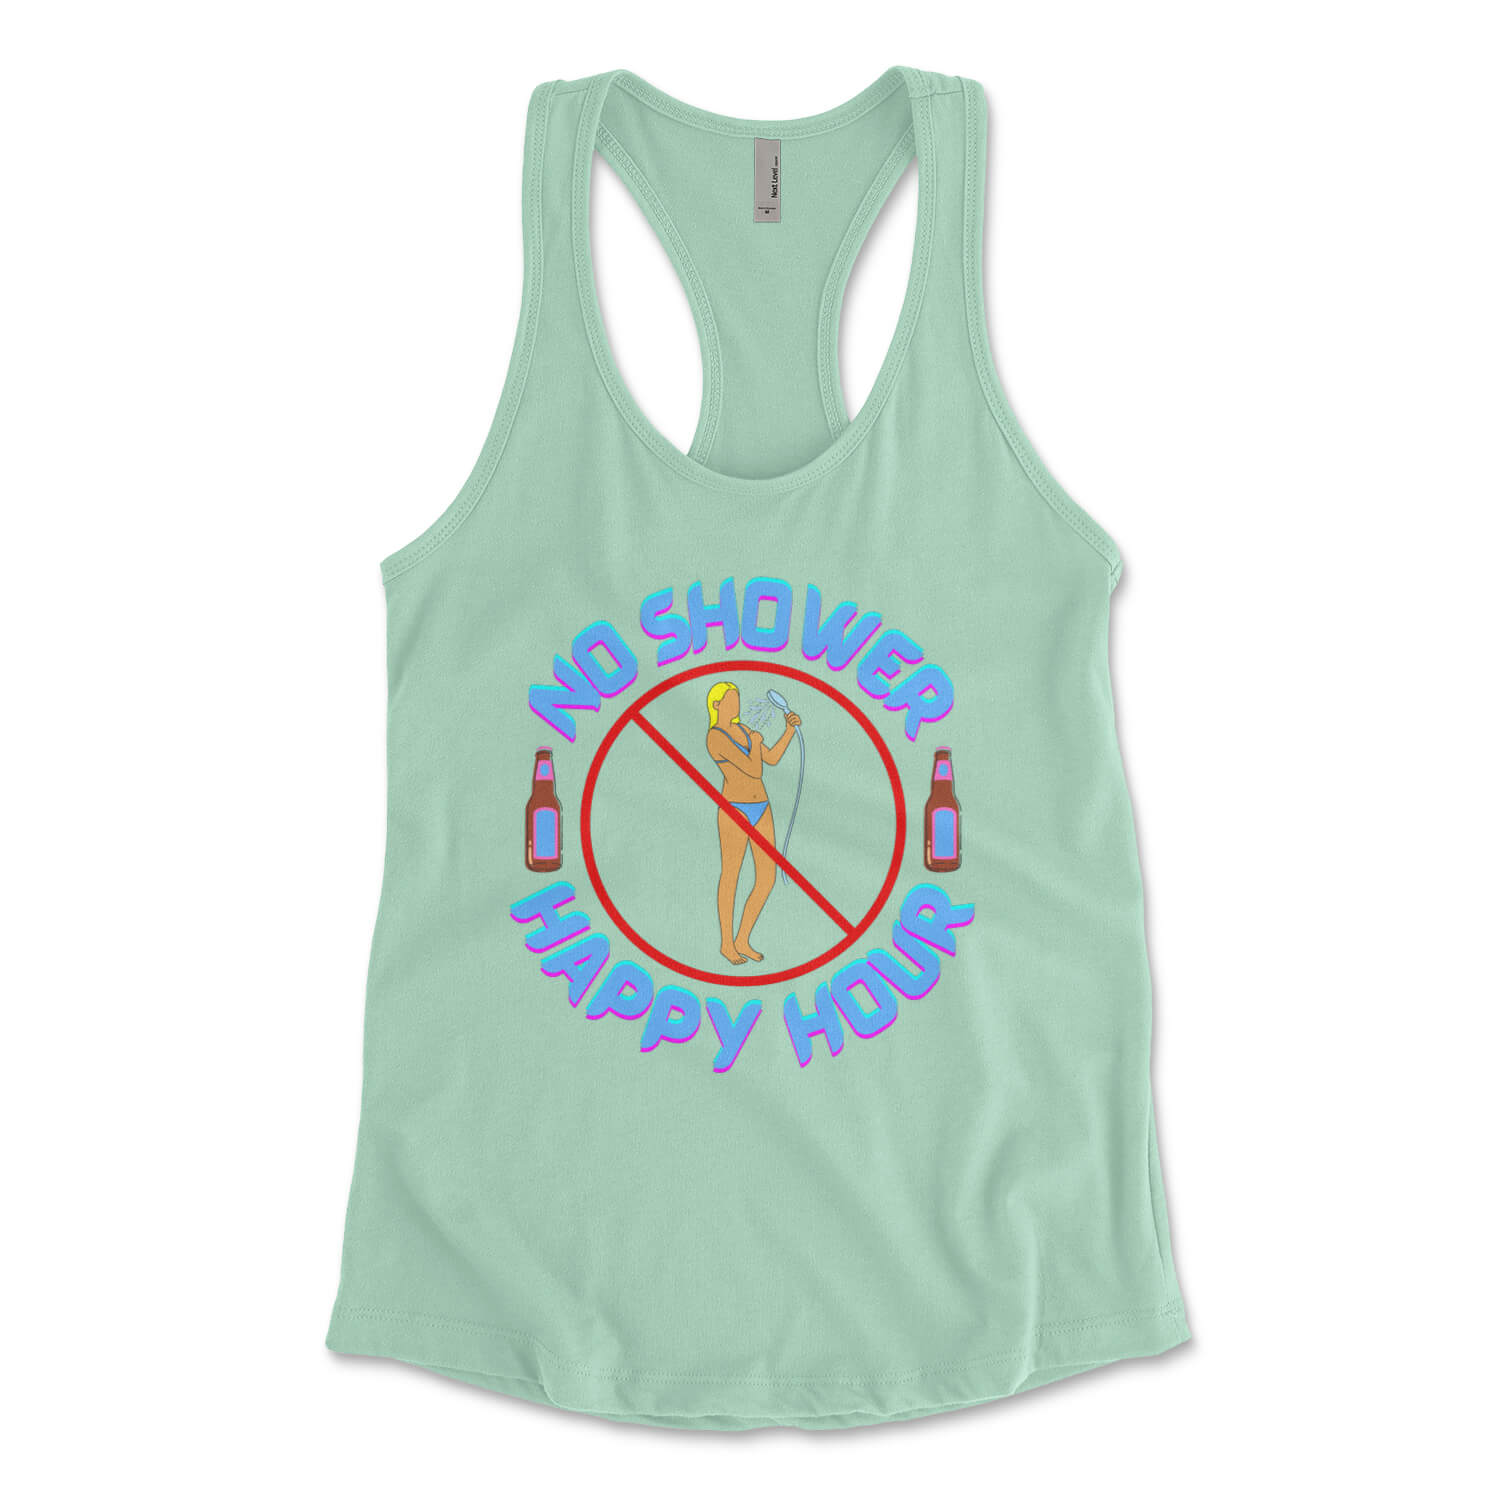 No shower happy hour sea isle city new jersey mint womens tank top Phillygoat